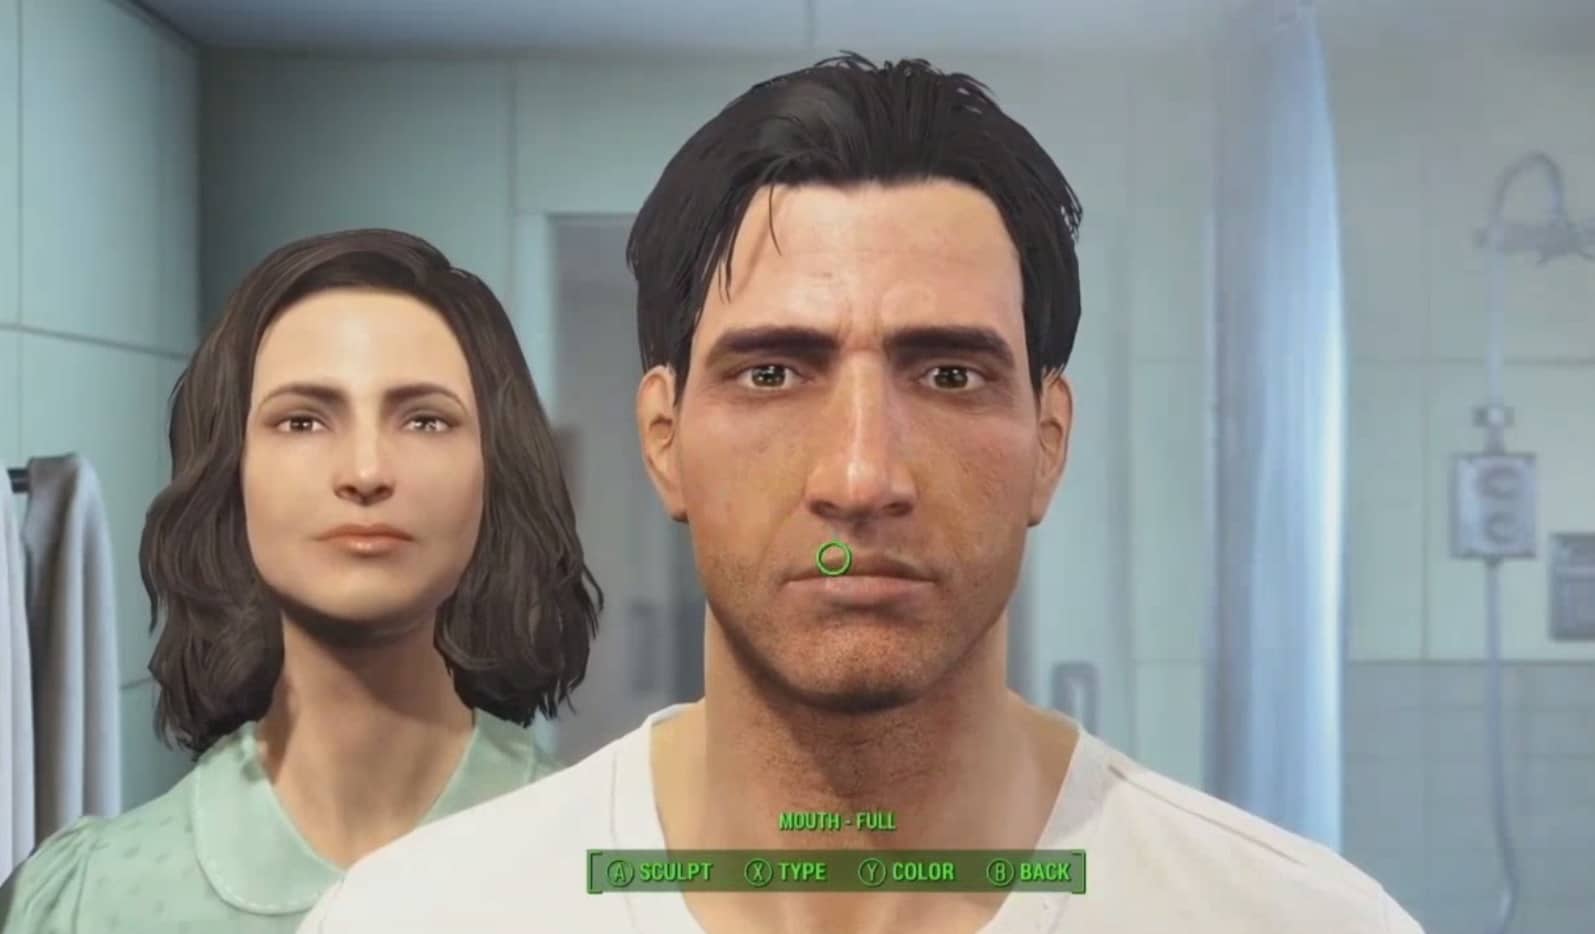 Fallout 4 Character Customization Face Scultping With Wife In Bathroom Mirror Xbox One, PS4, PC Gameplay Screenshot